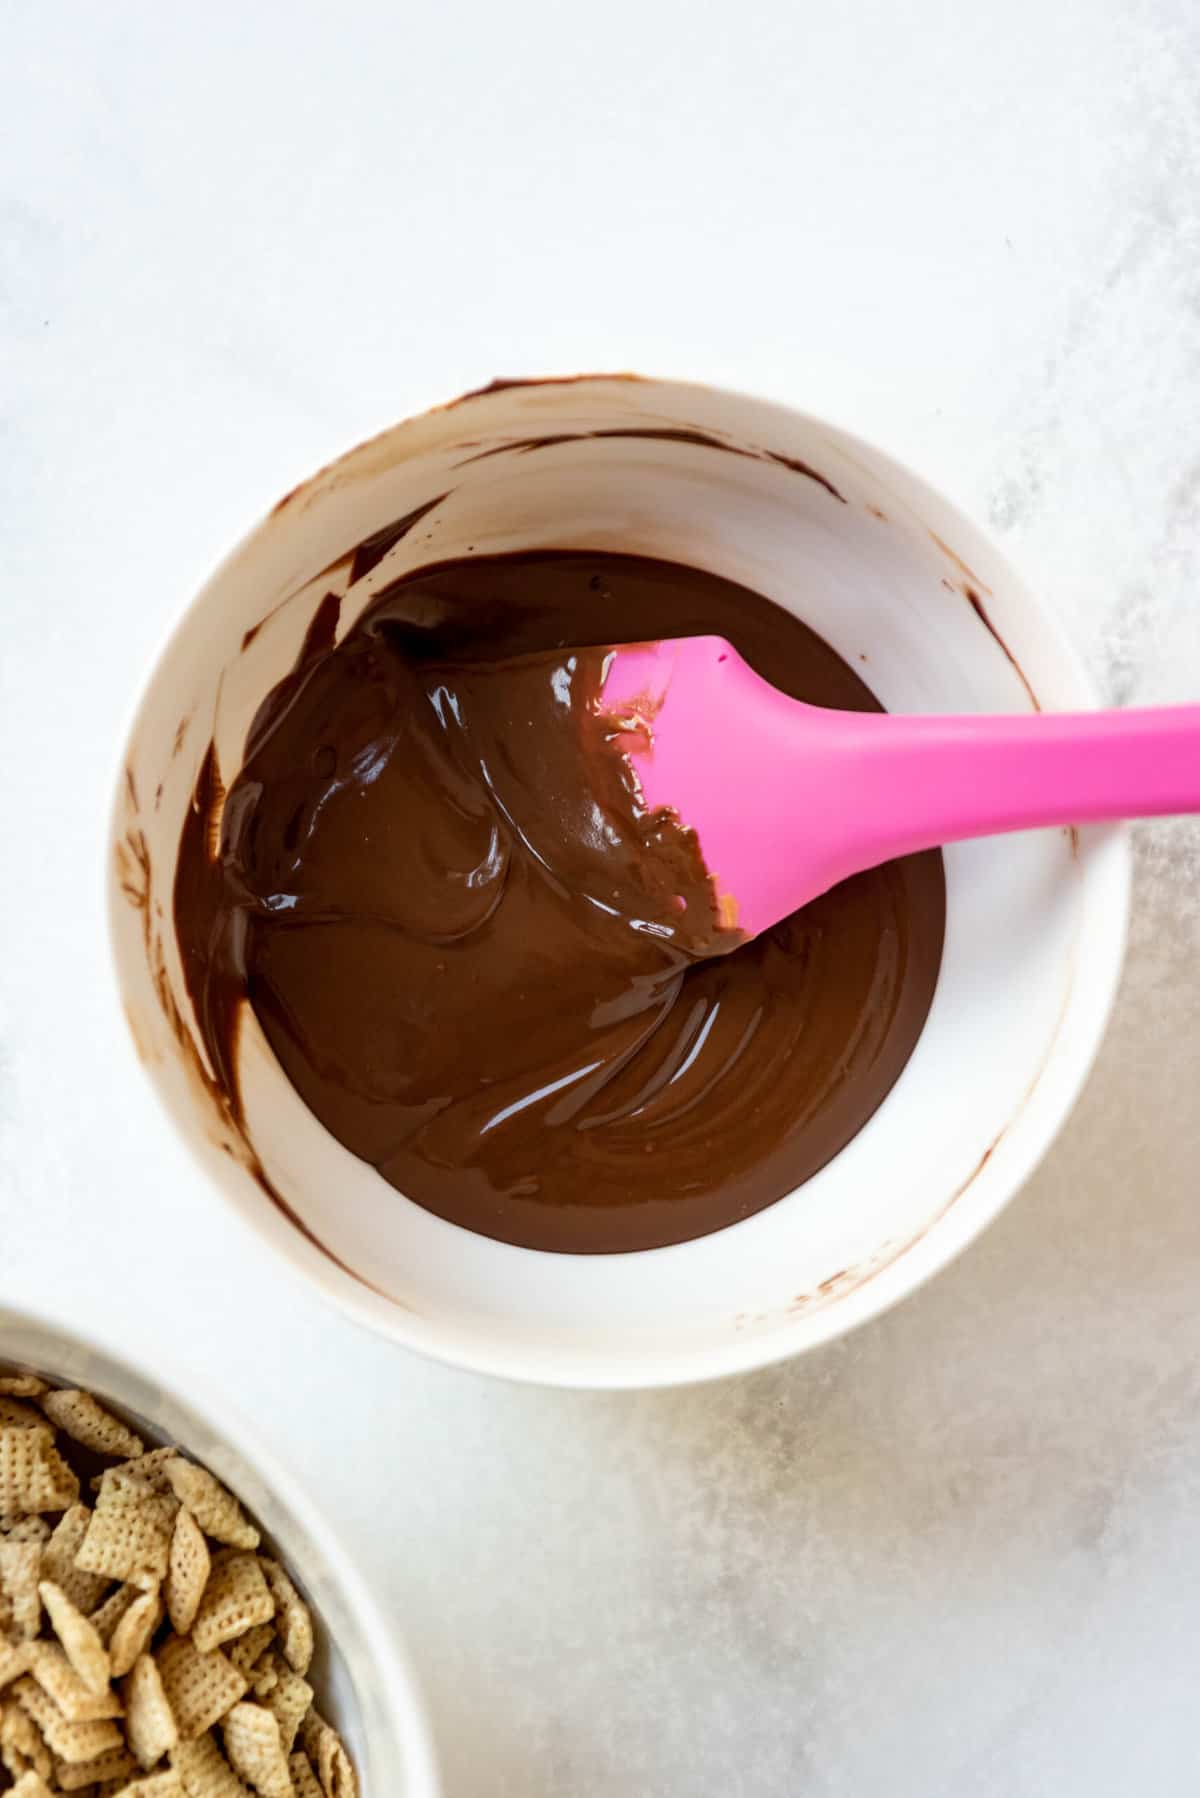 An image of melted chocolate in a bowl.